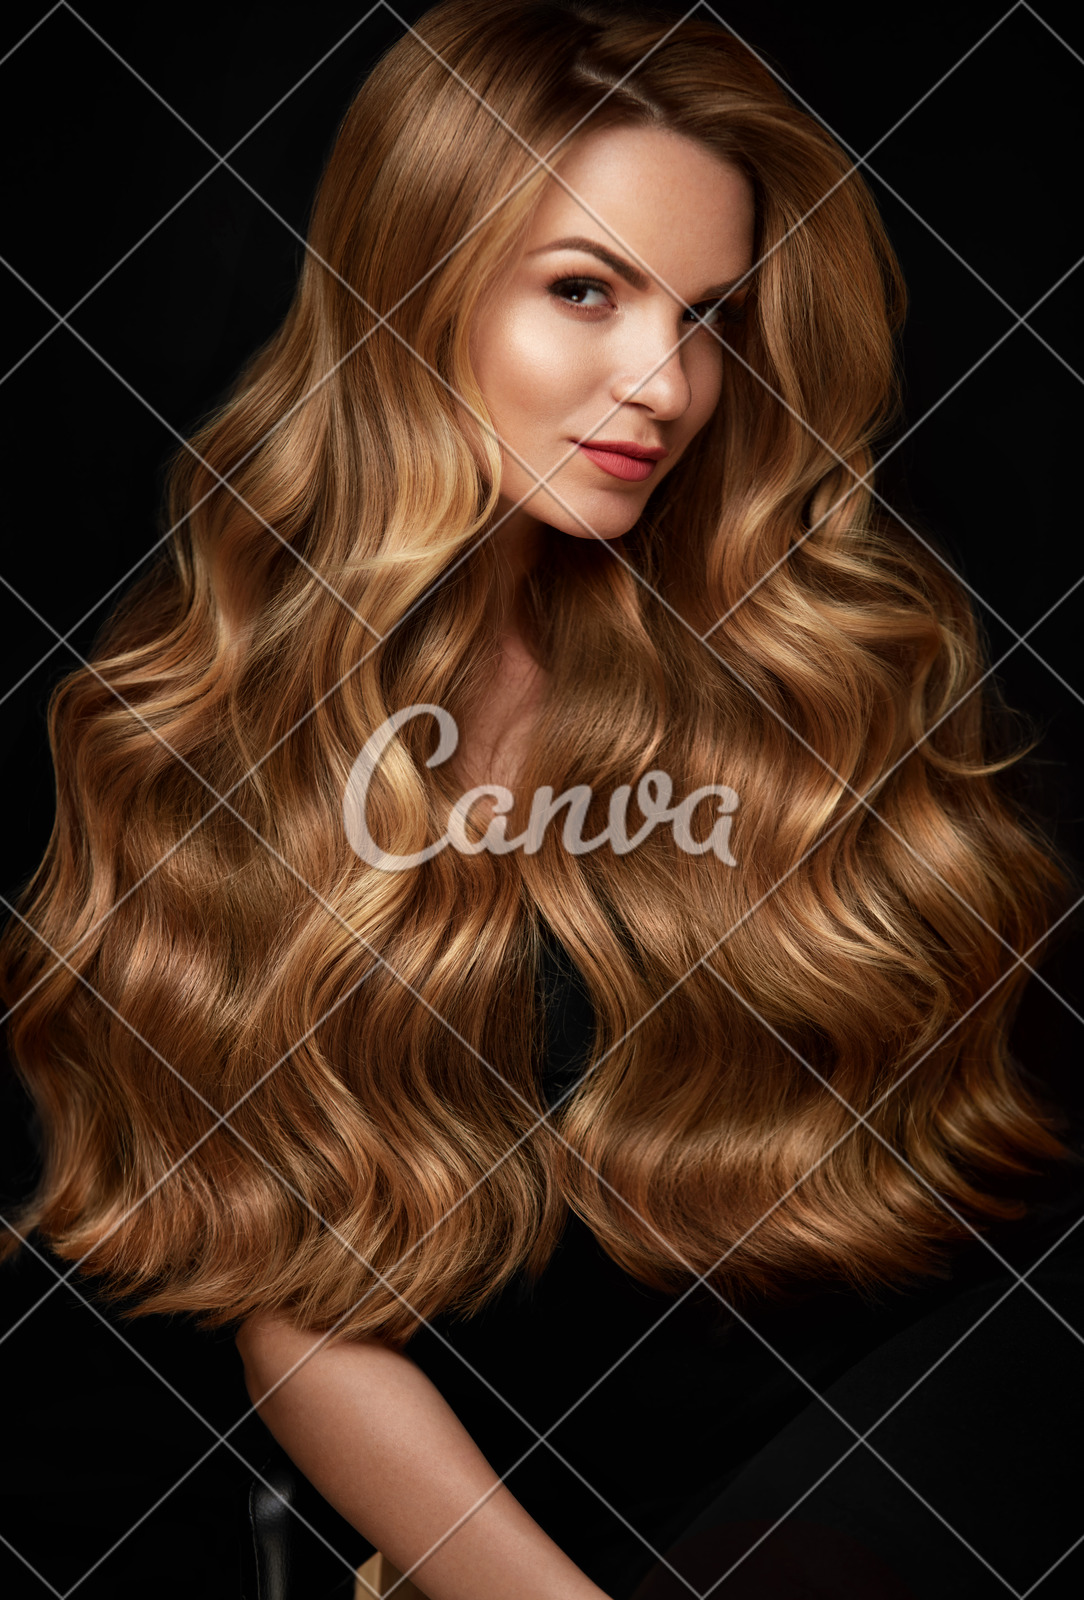 Long Blonde Hair Woman With Wavy Hairstyle Beauty Face Photos